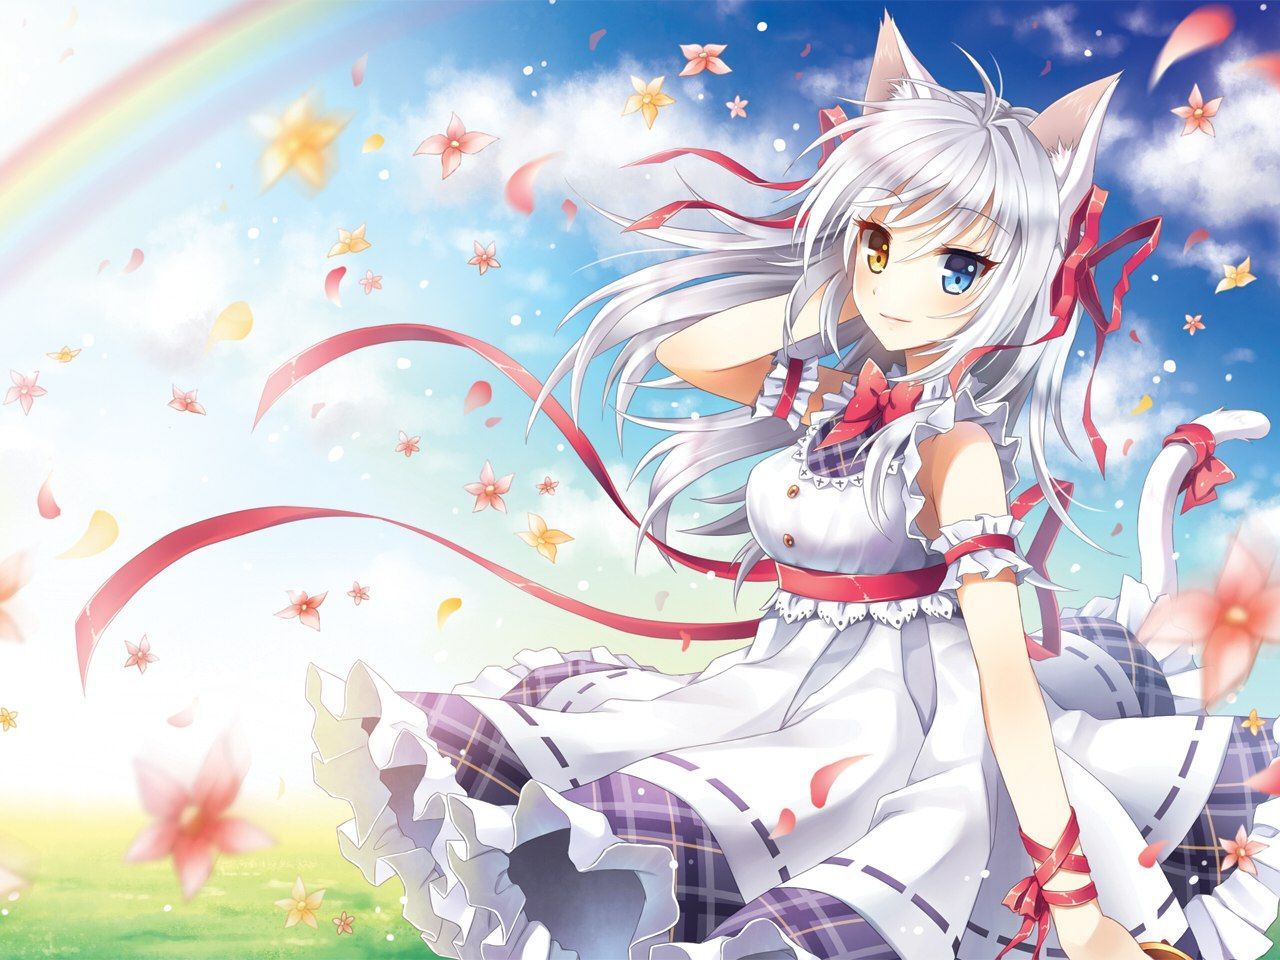 Anime Cat Girl with White Hair Wallpaper Stuff to Buy. Девушка